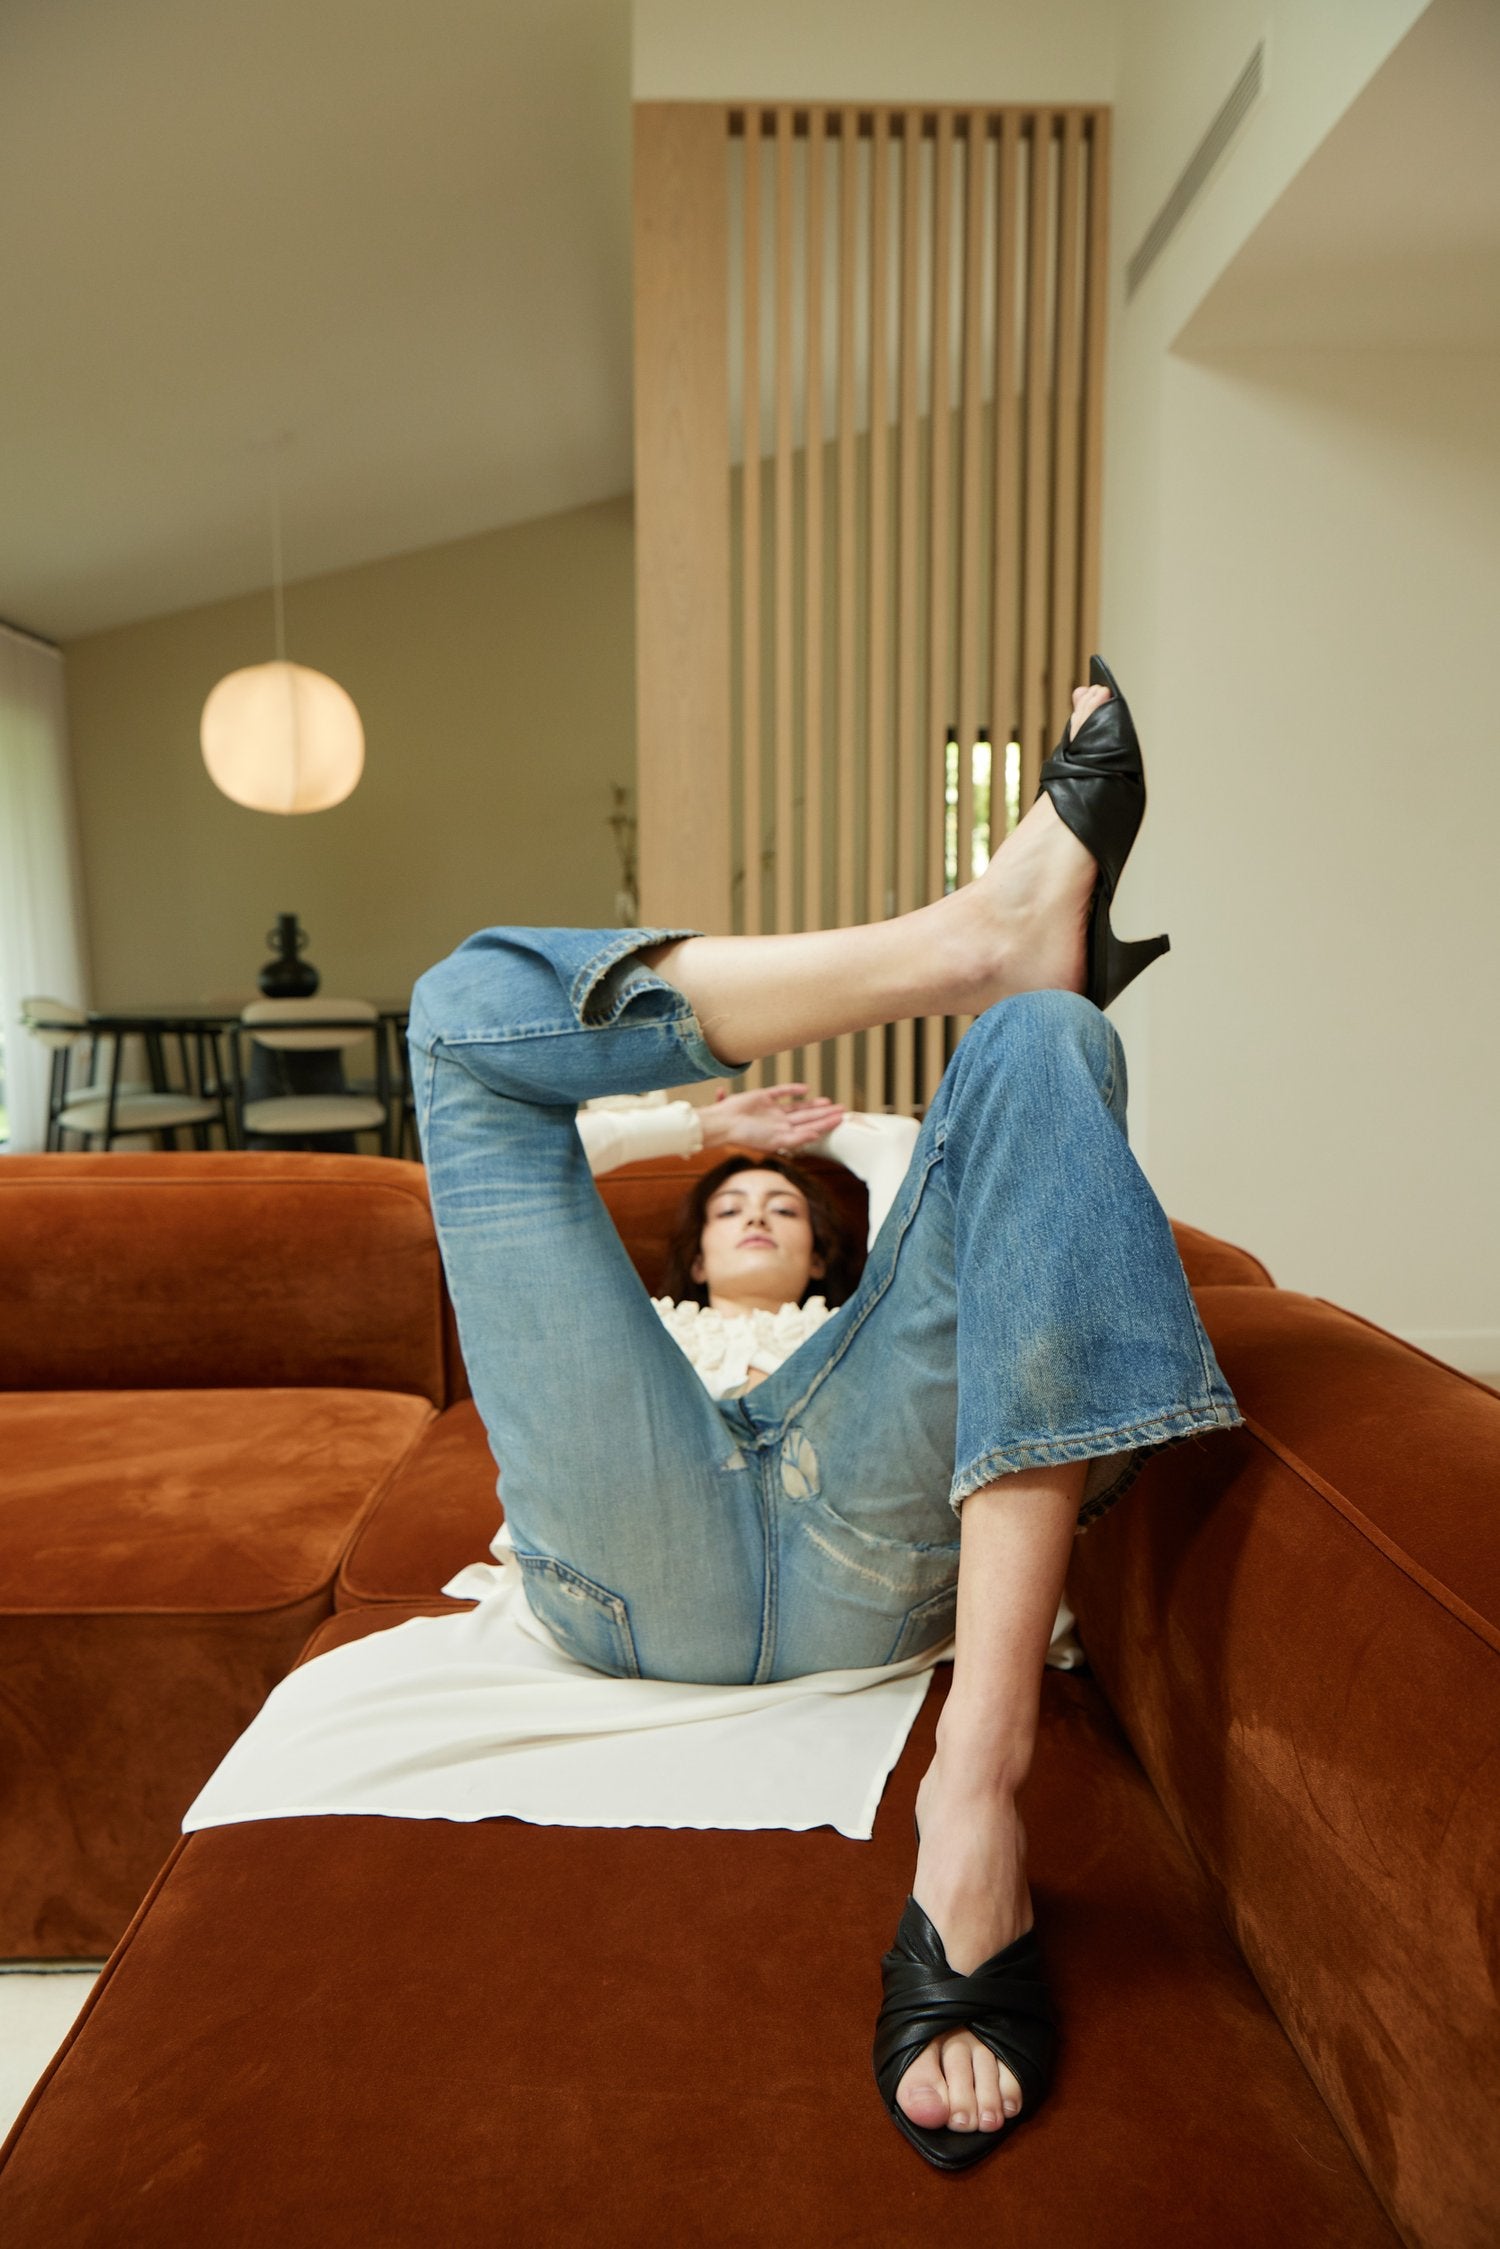 Woman laying on couch with legs bent, knot heel in black